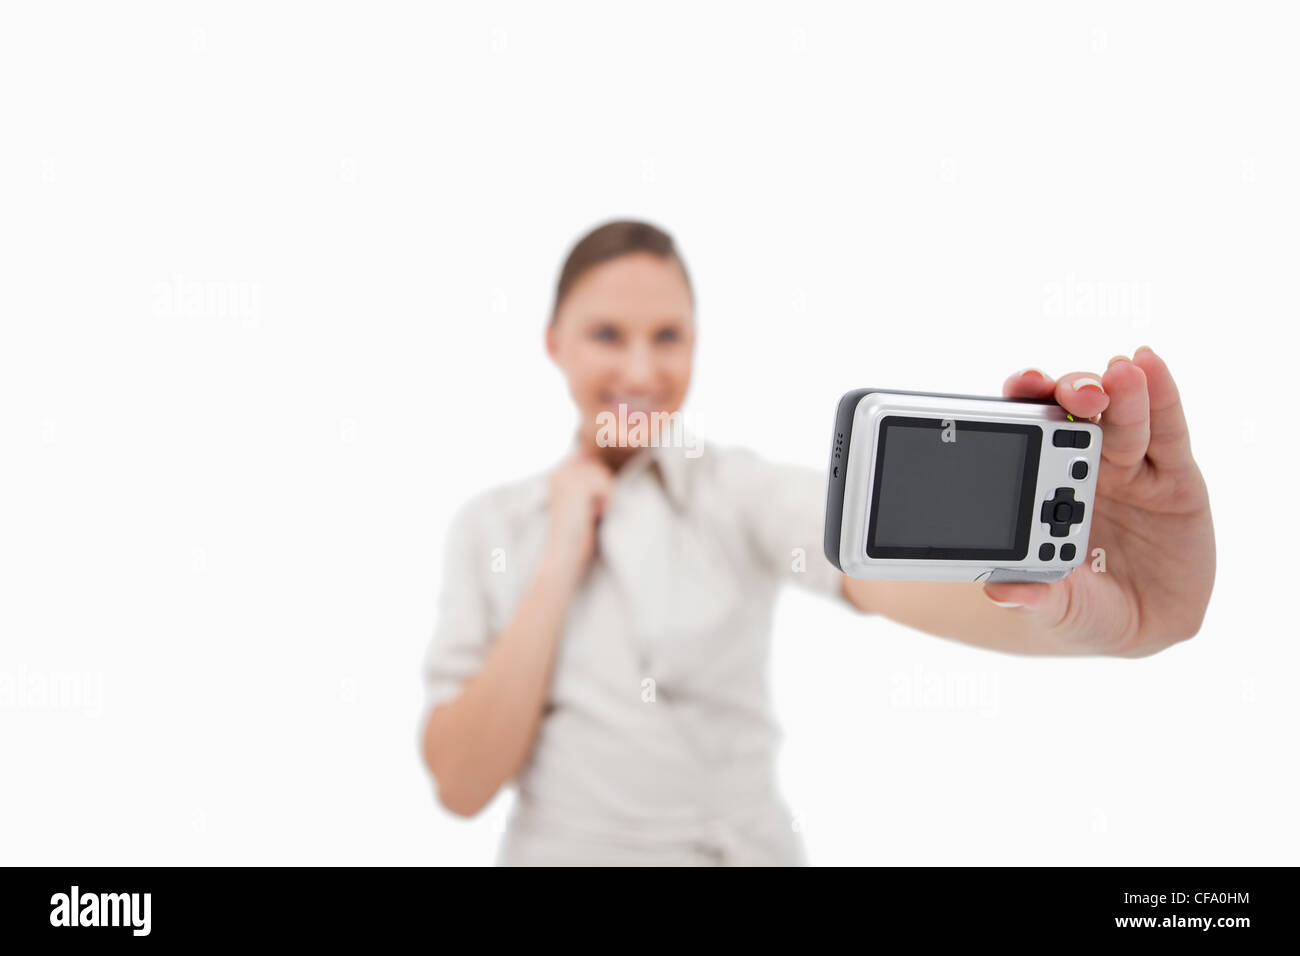 Businesswoman taking a picture of herself Stock Photo